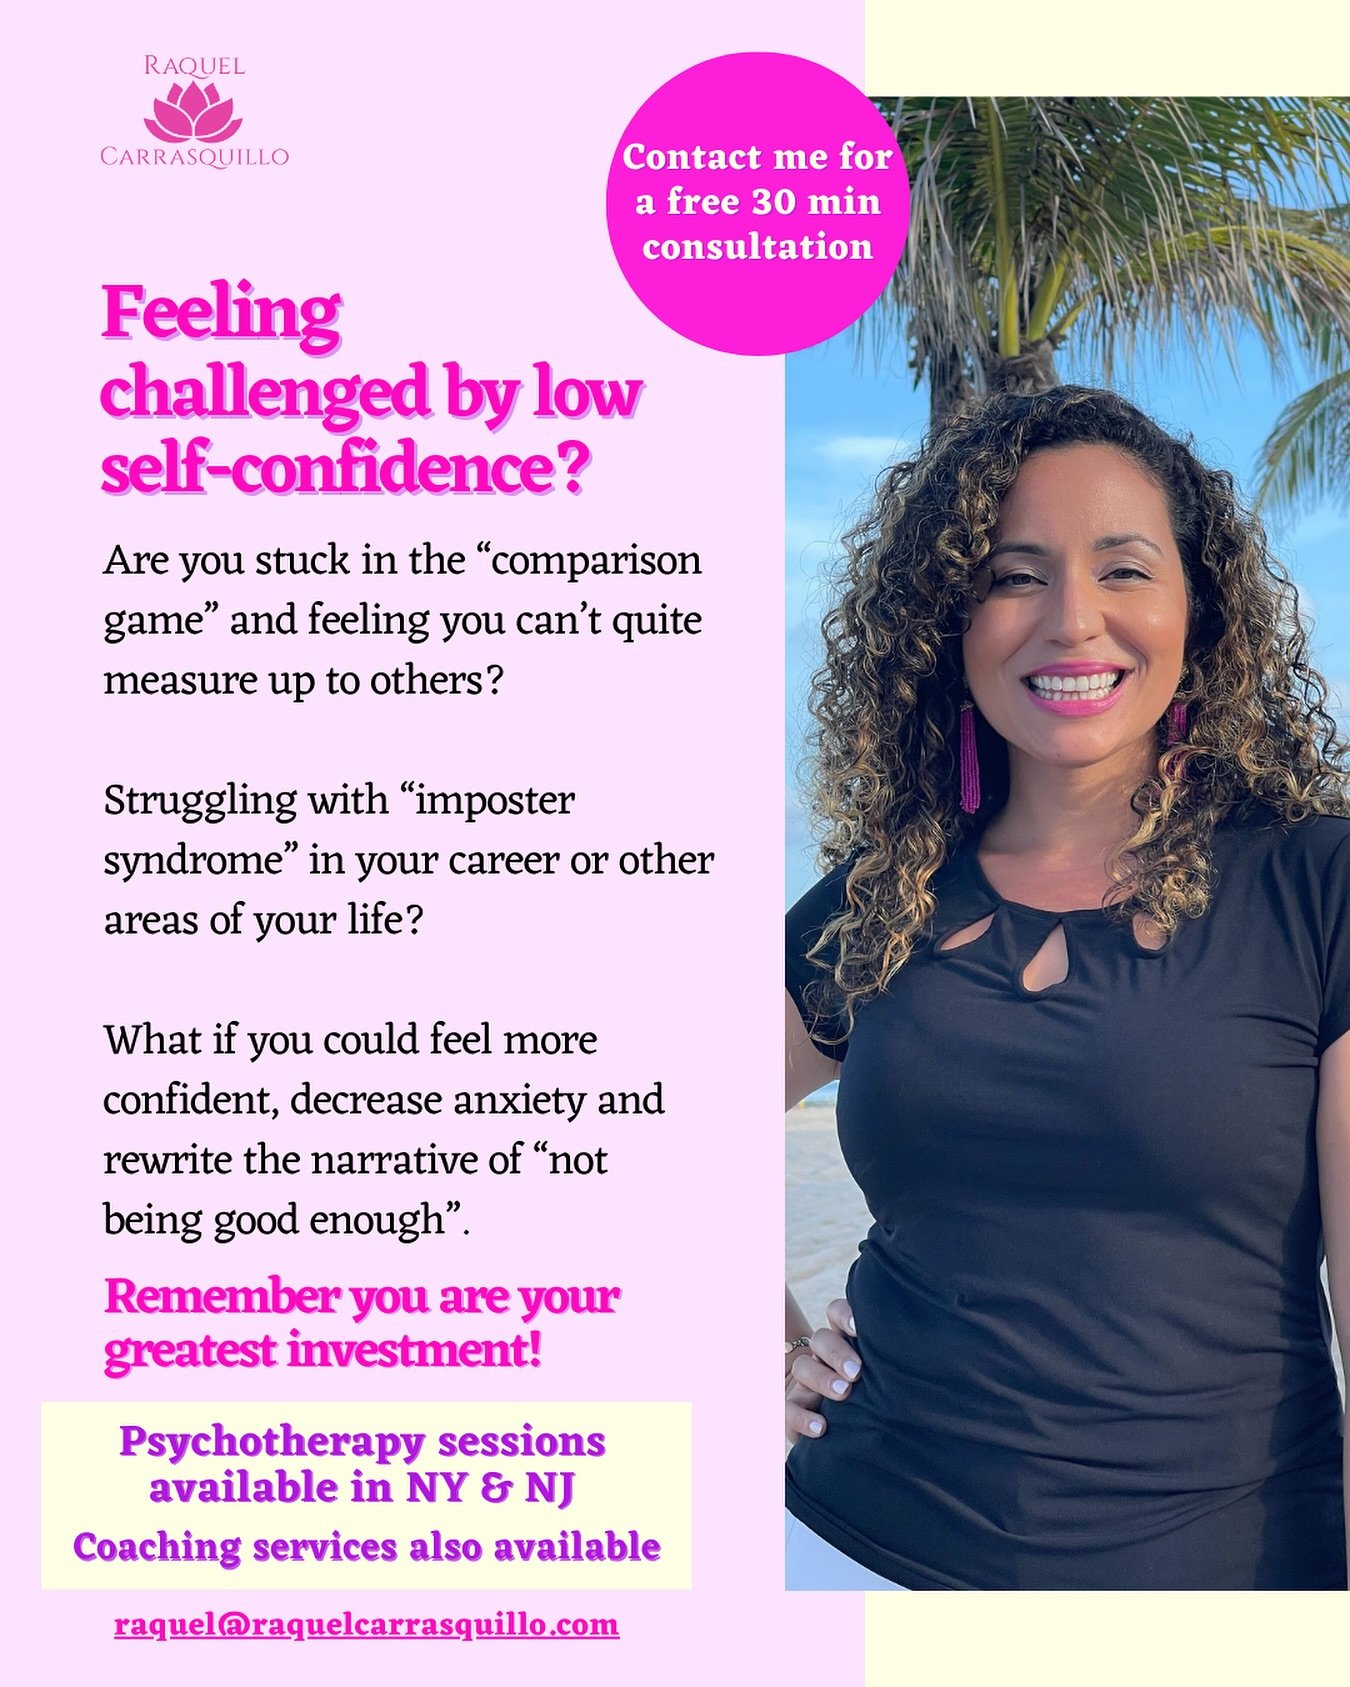 If you are looking to:
✨Build confidence &amp; heal your relationship with yourself
✨Transform self-limiting beliefs rooted in old narratives &amp; trauma
✨Be equipped with tools to reduce anxiety &amp; fear

Schedule your free 30 minute consultation